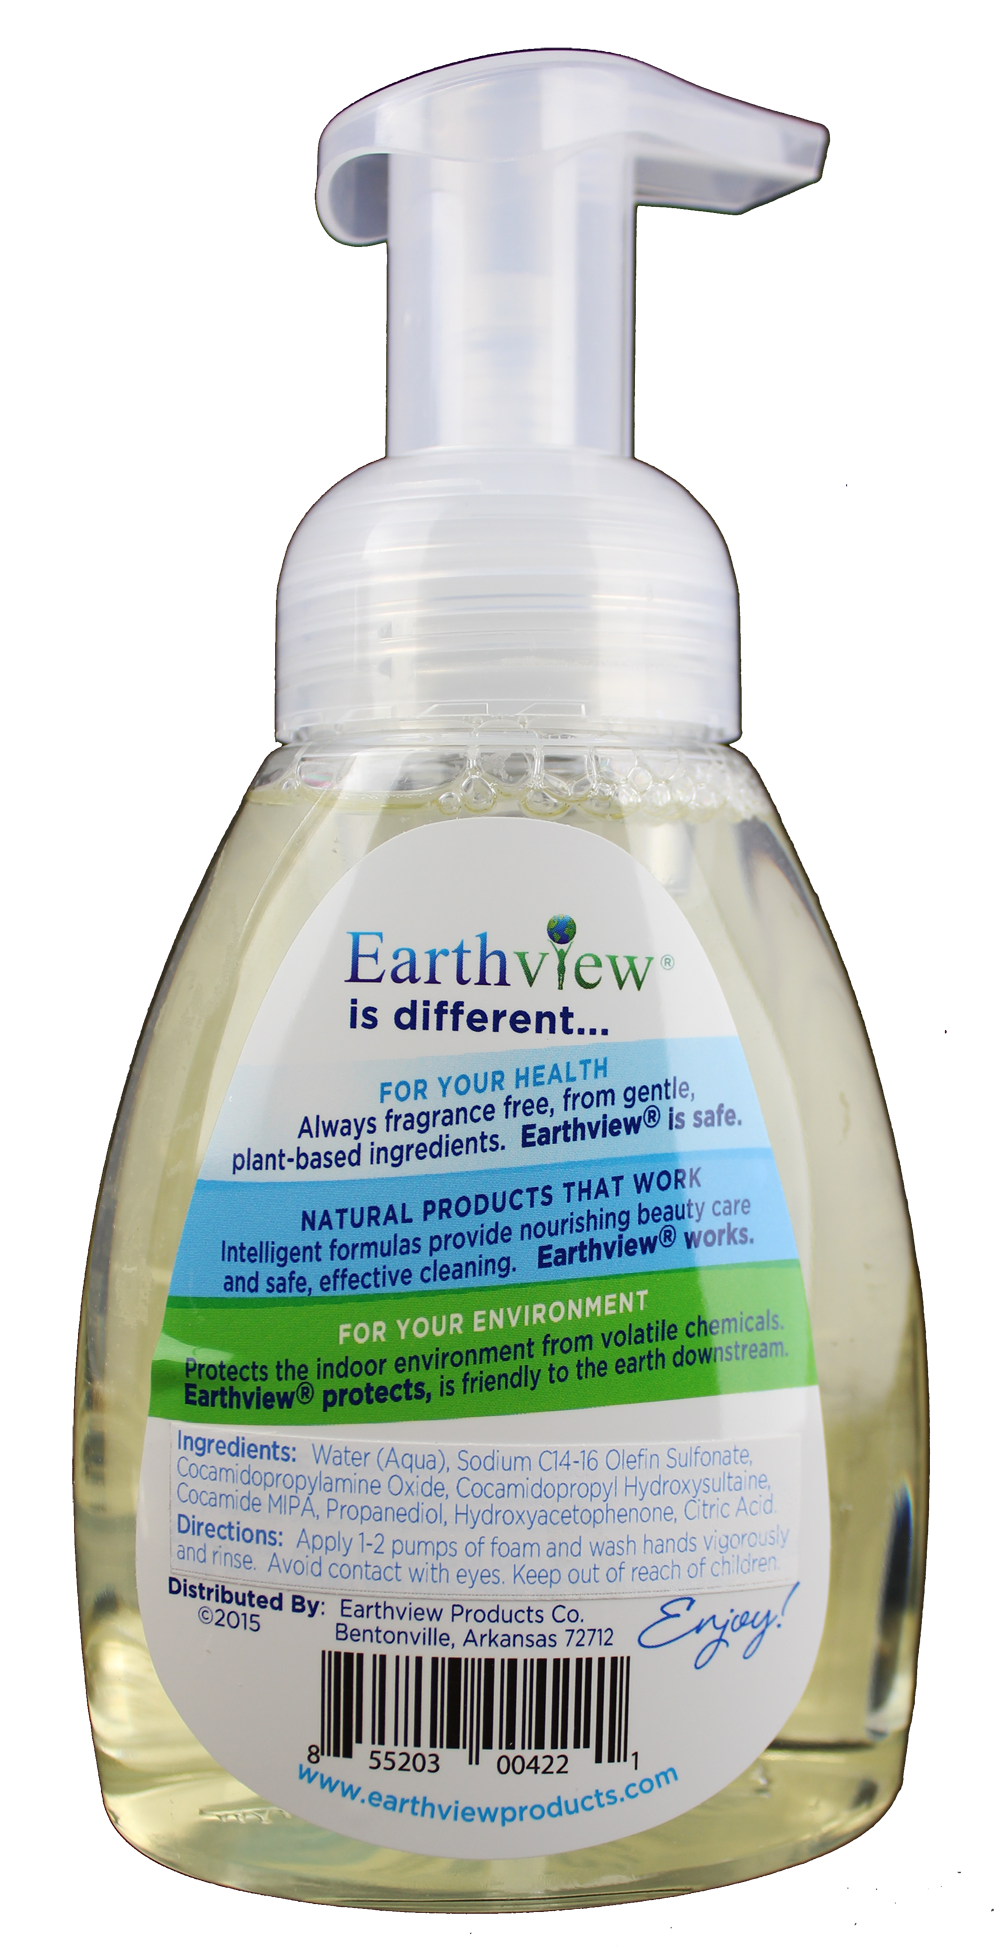 Refill Bathroom Cleaner 128 oz - Earthview Products :Earthview Products